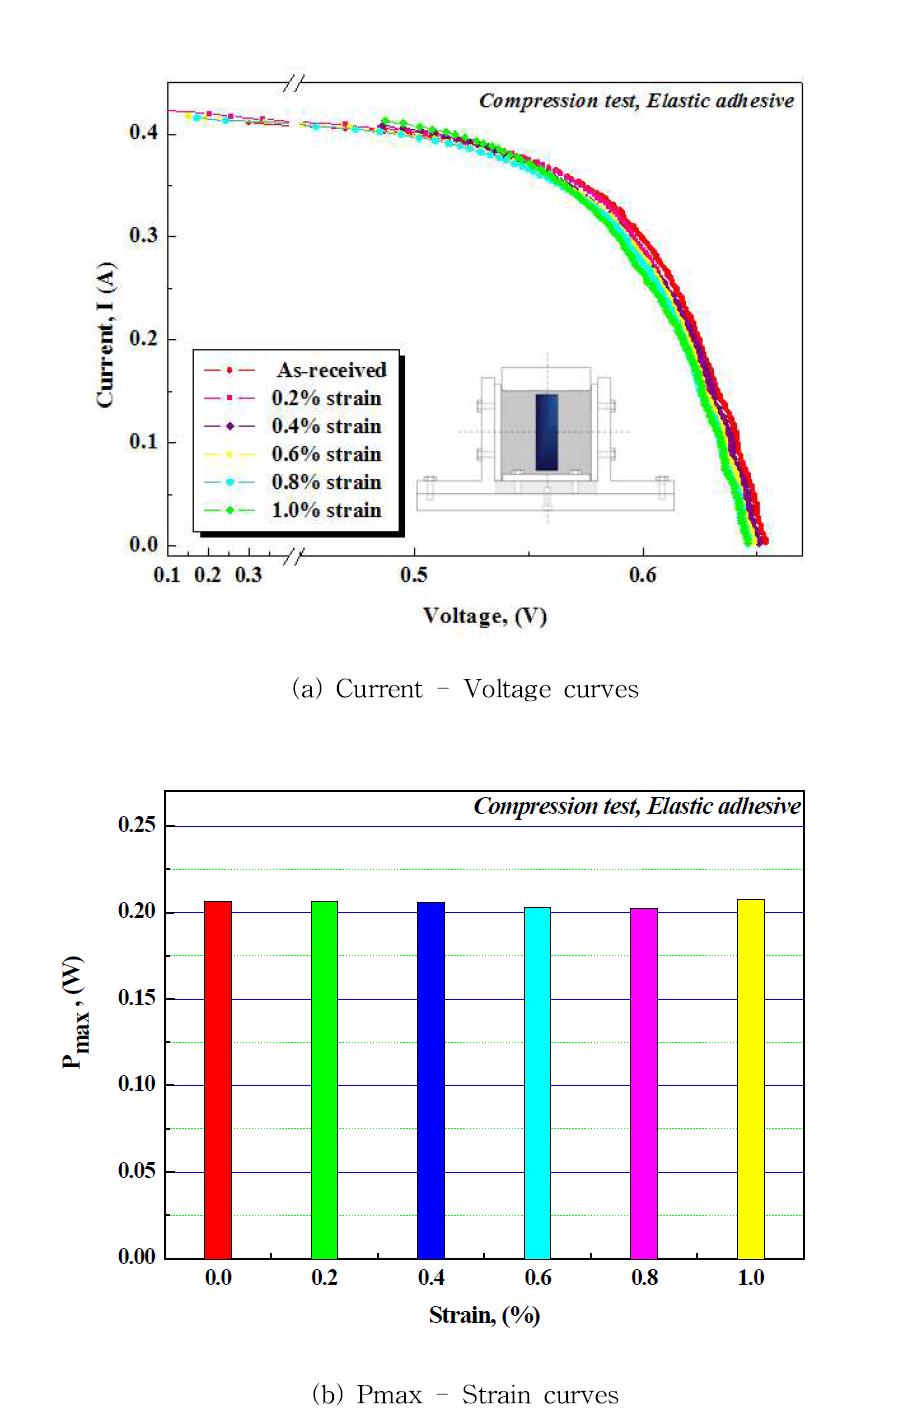 Performance characteristics of solar modules after compression test